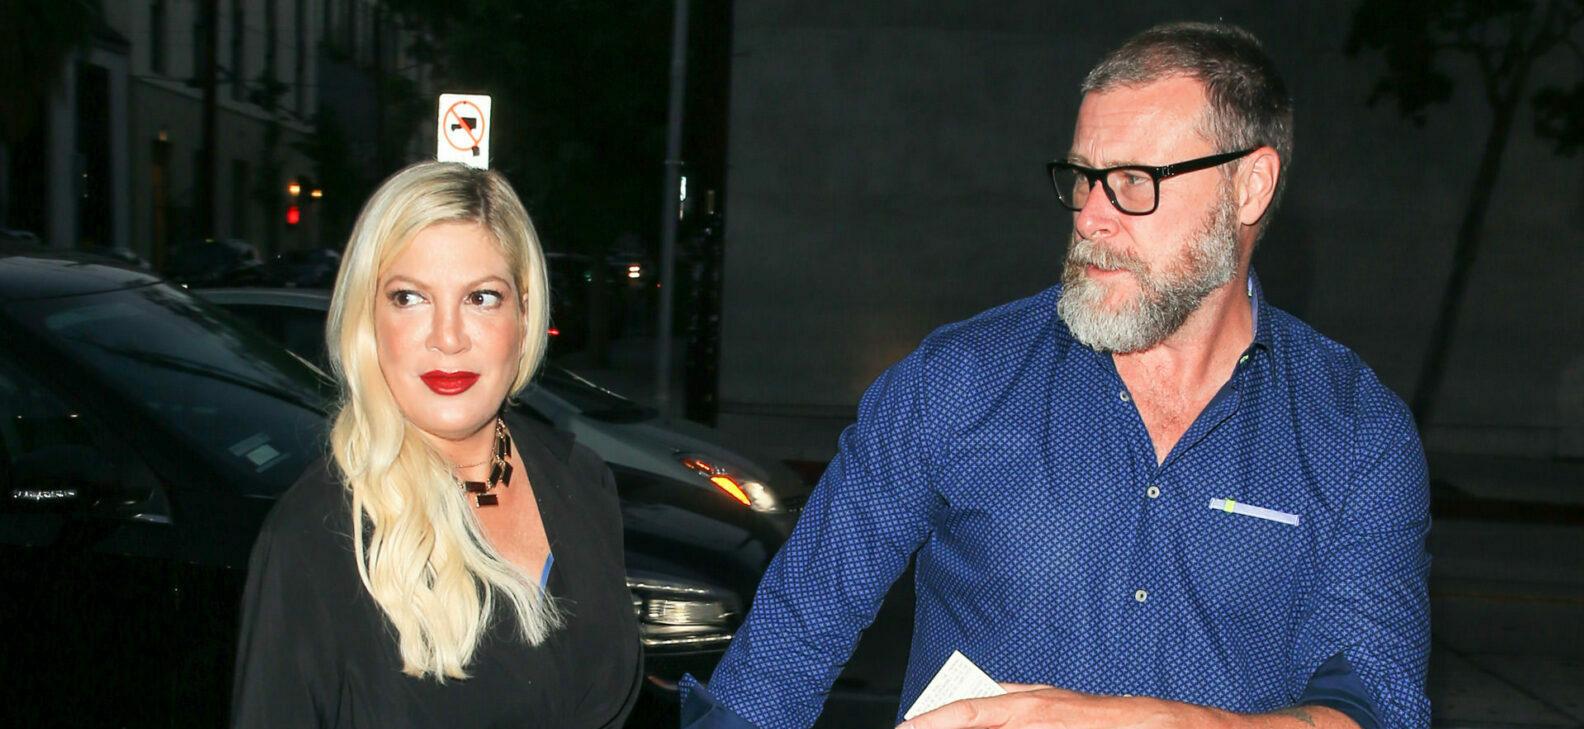 Tori Spelling’s Husband Has A Girlfriend But Still Calls The Actress ‘The Love Of My Life’